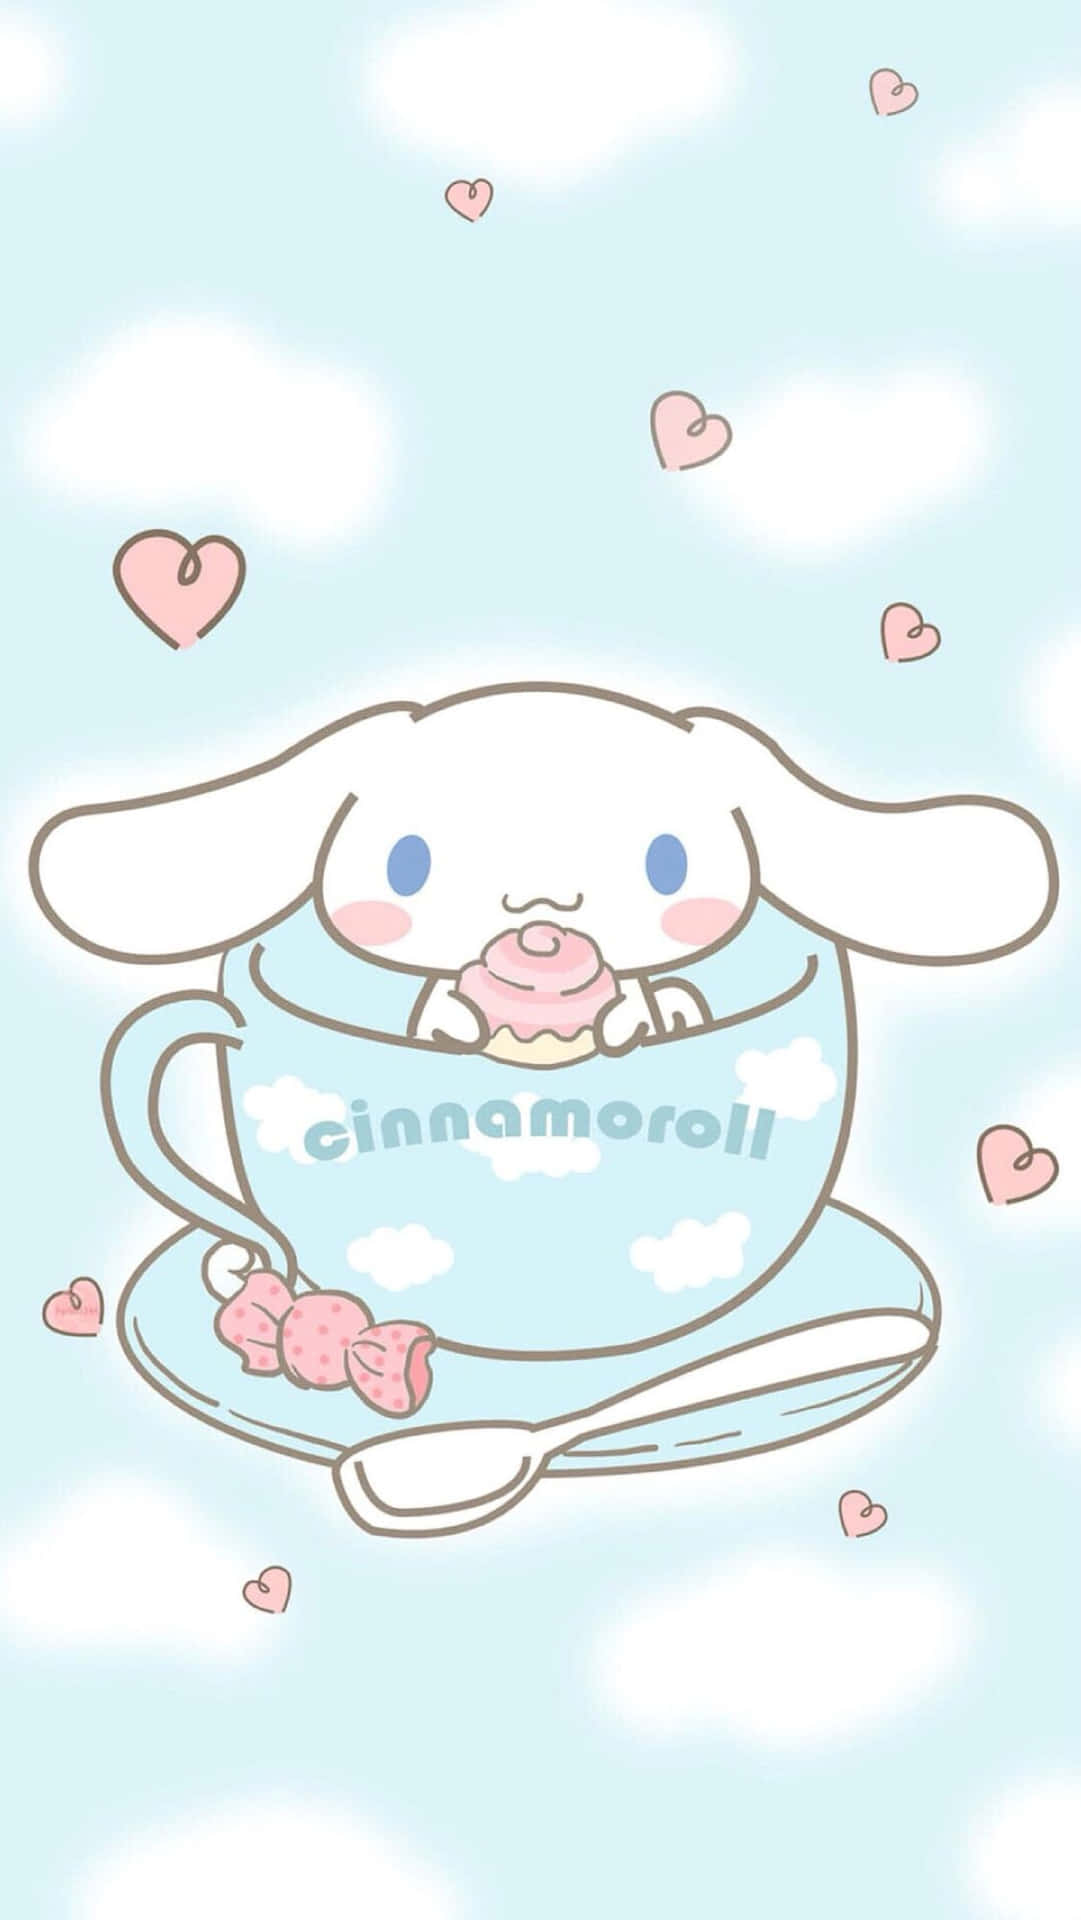 Get your day off to a sweet start, with Cinnamoroll! Wallpaper